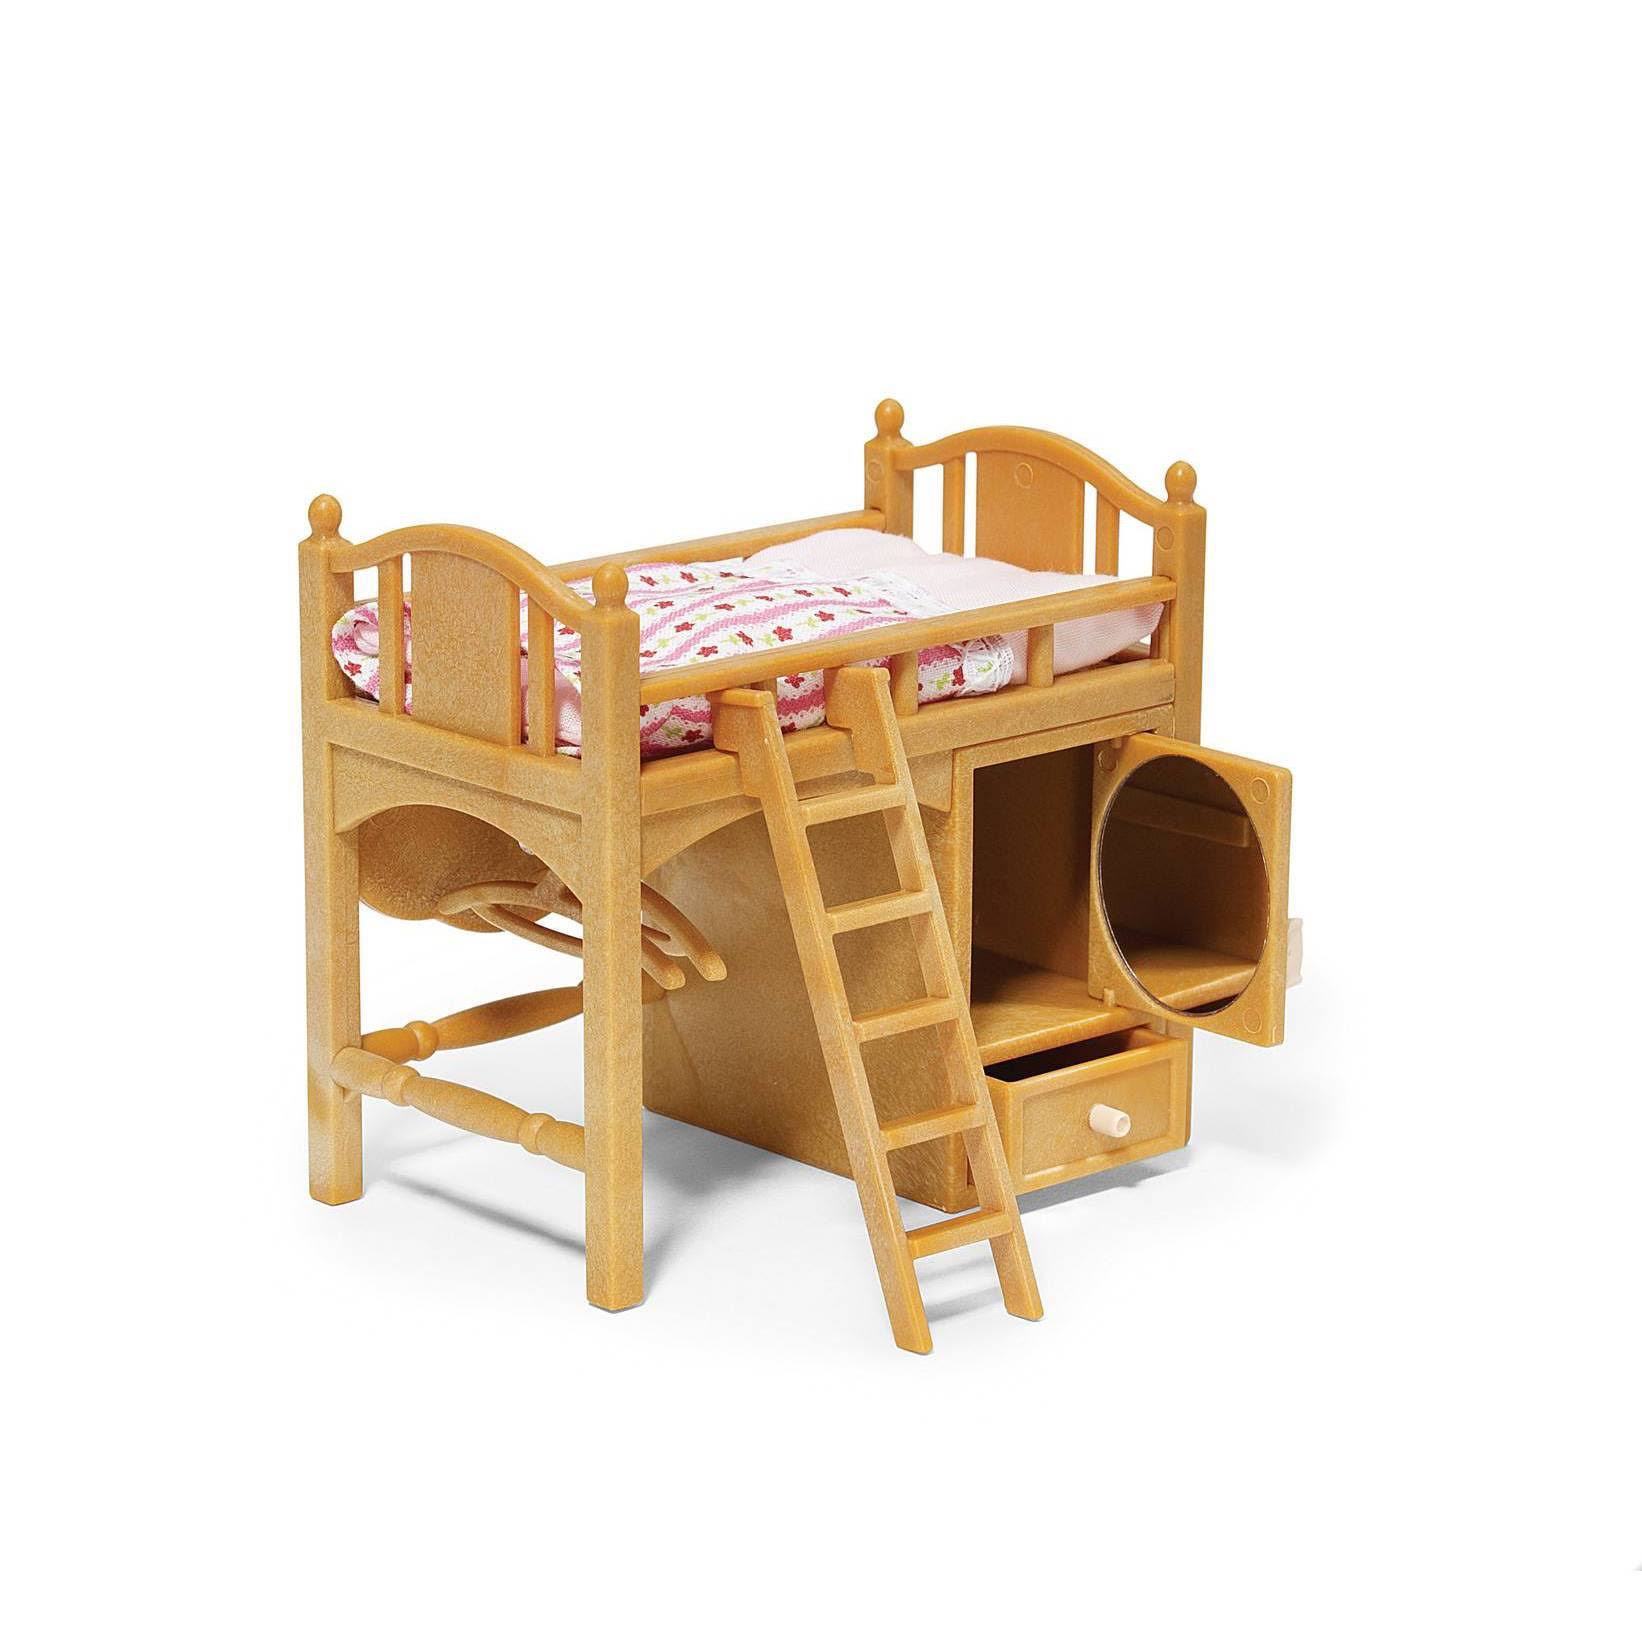 Calico Critters Sister's Loft Bed Toy Play Set